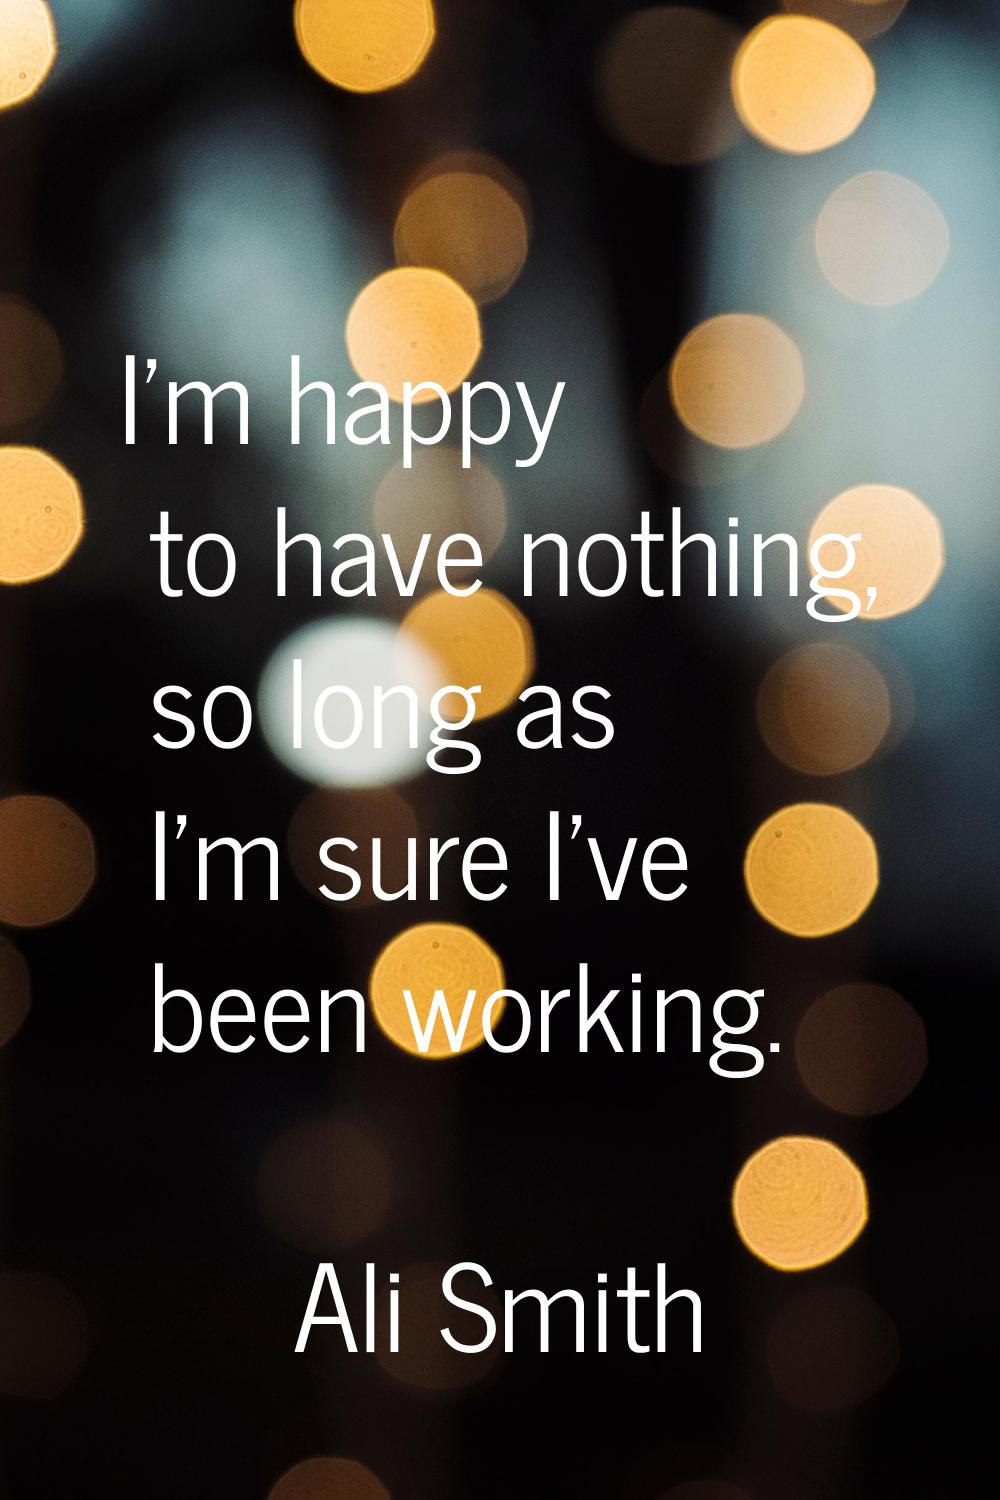 I'm happy to have nothing, so long as I'm sure I've been working.